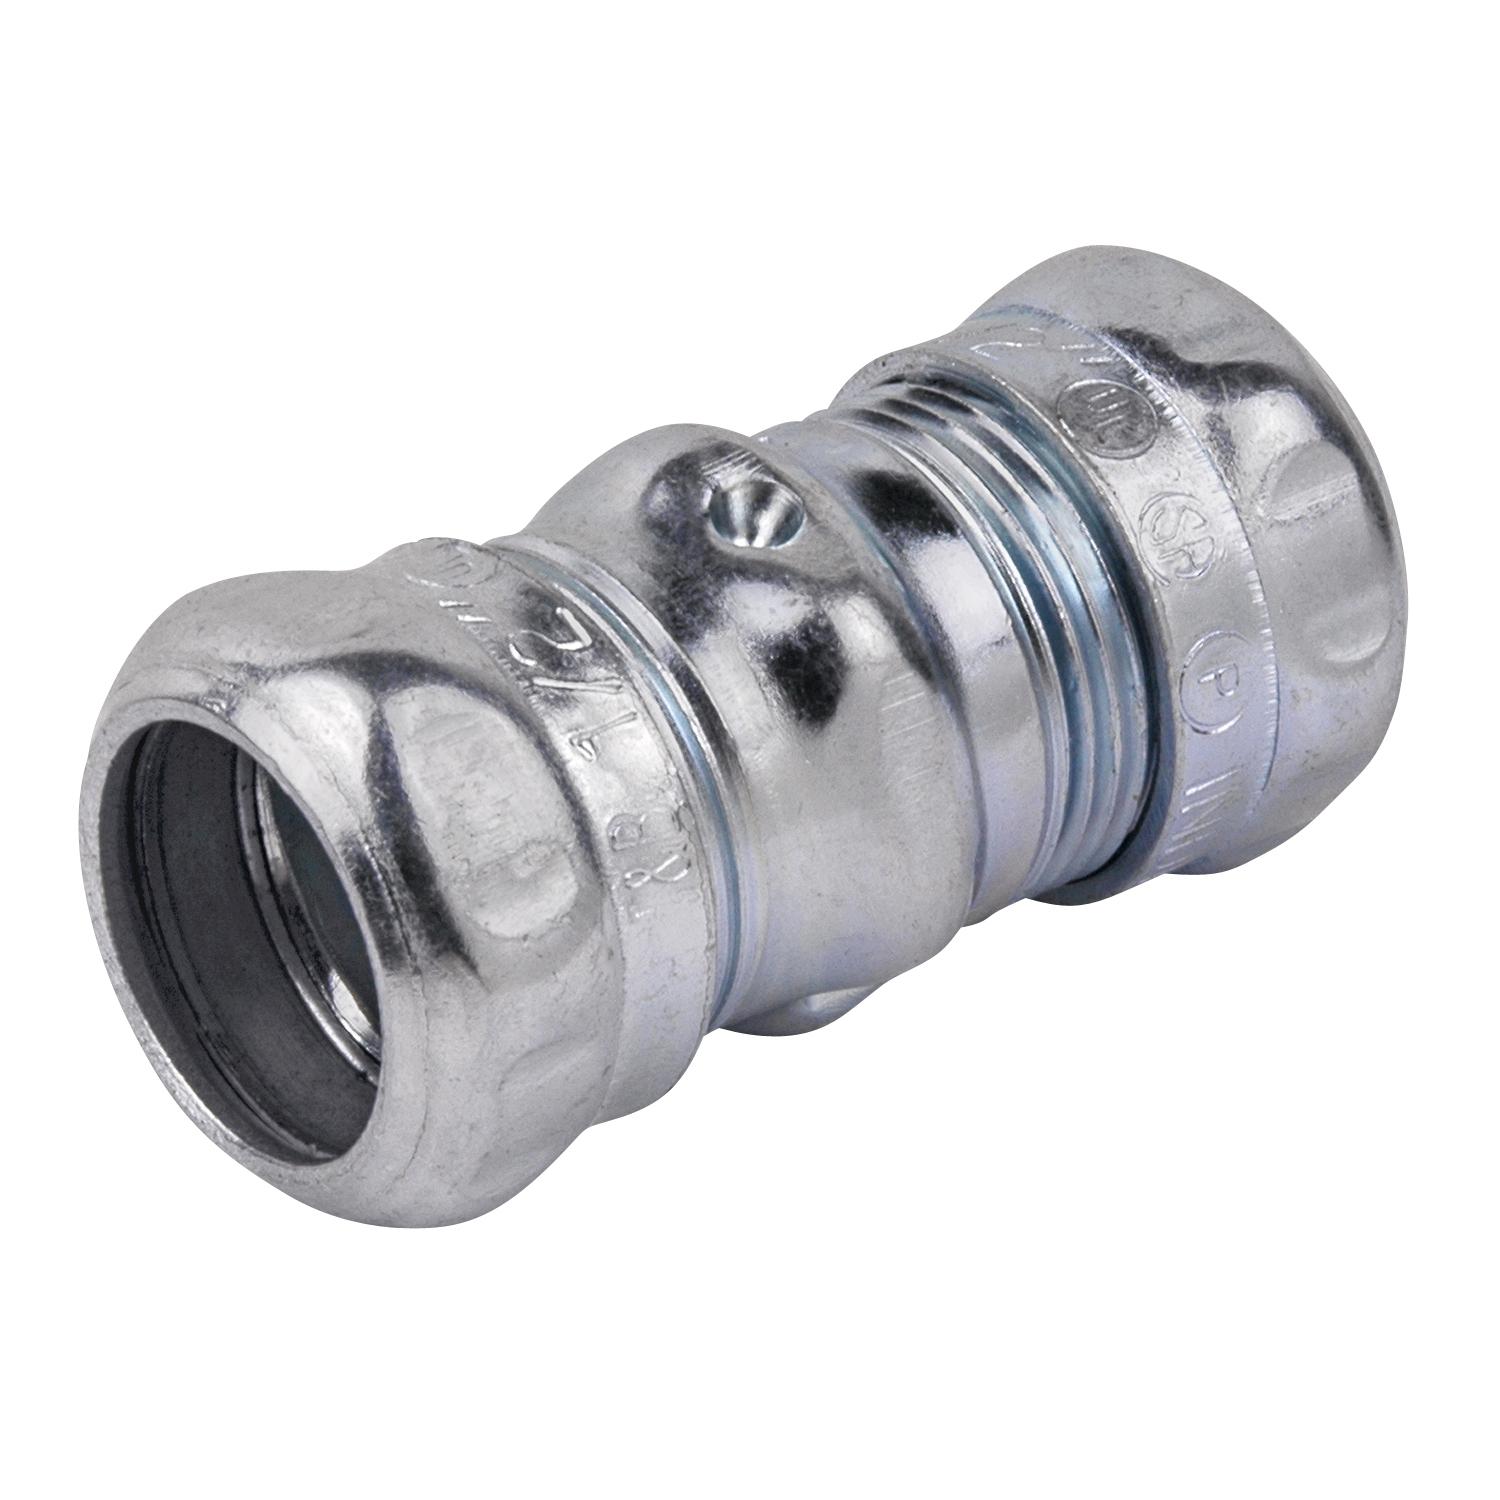 Thomas & Betts TK111A Steel City Compression Coupling